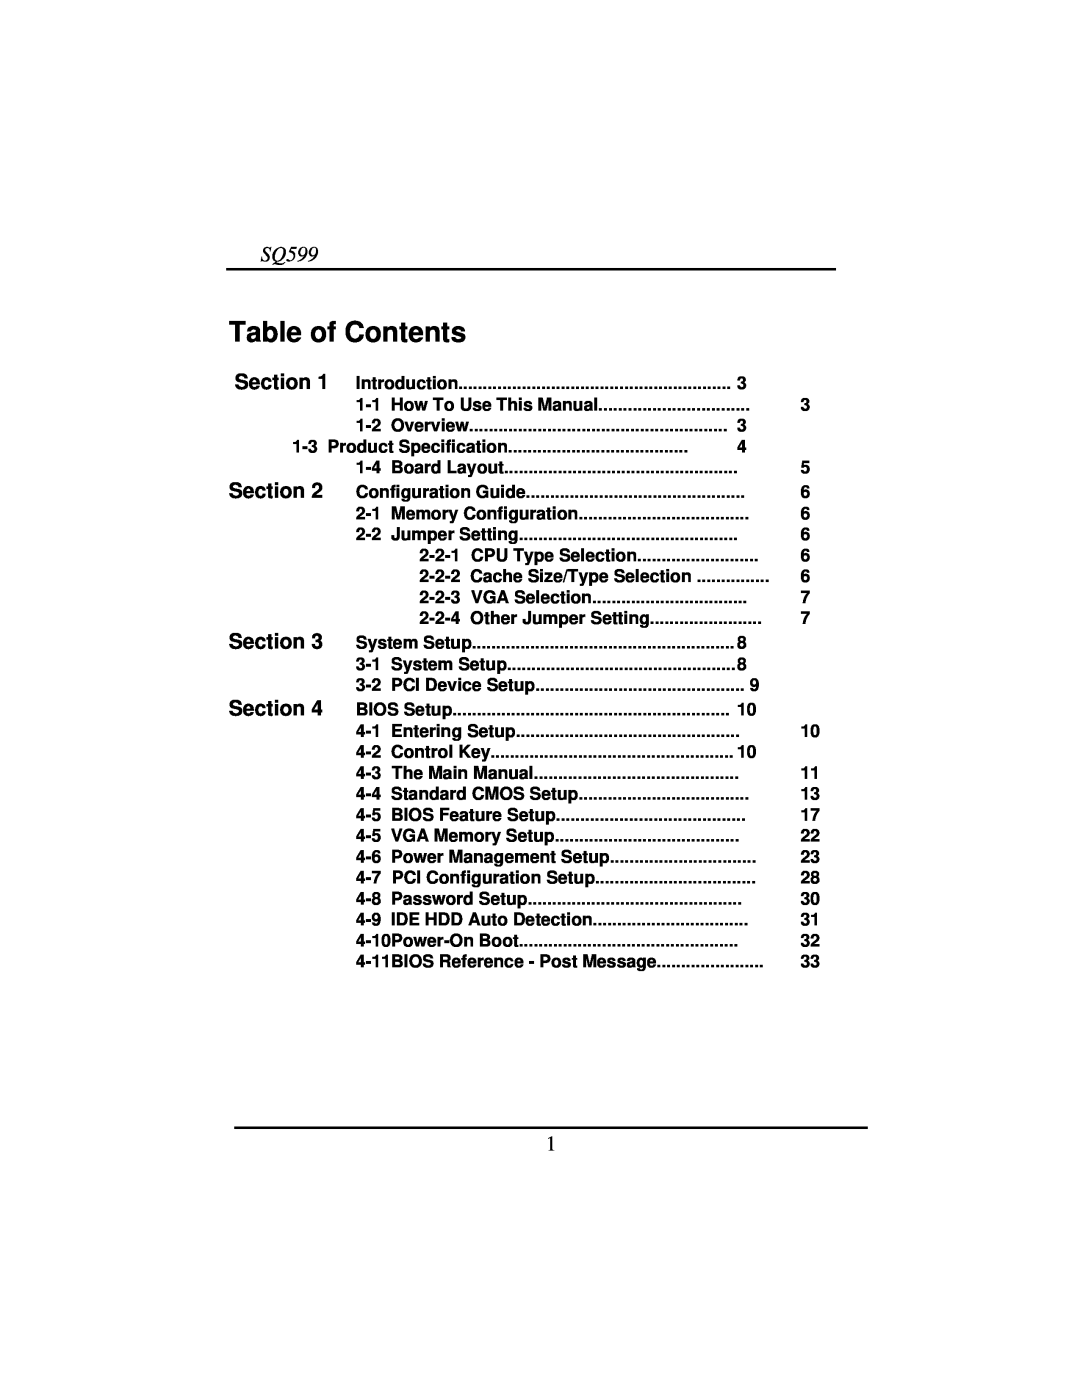 Intel SQ599 manual Table of Contents, Section 